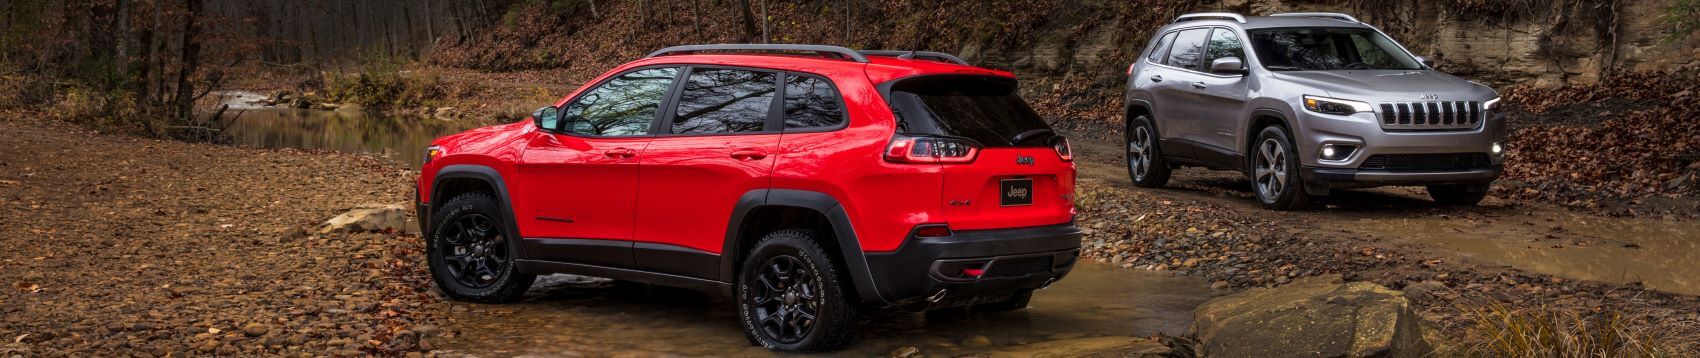 Test Drive The 2021 Jeep Cherokee Today!